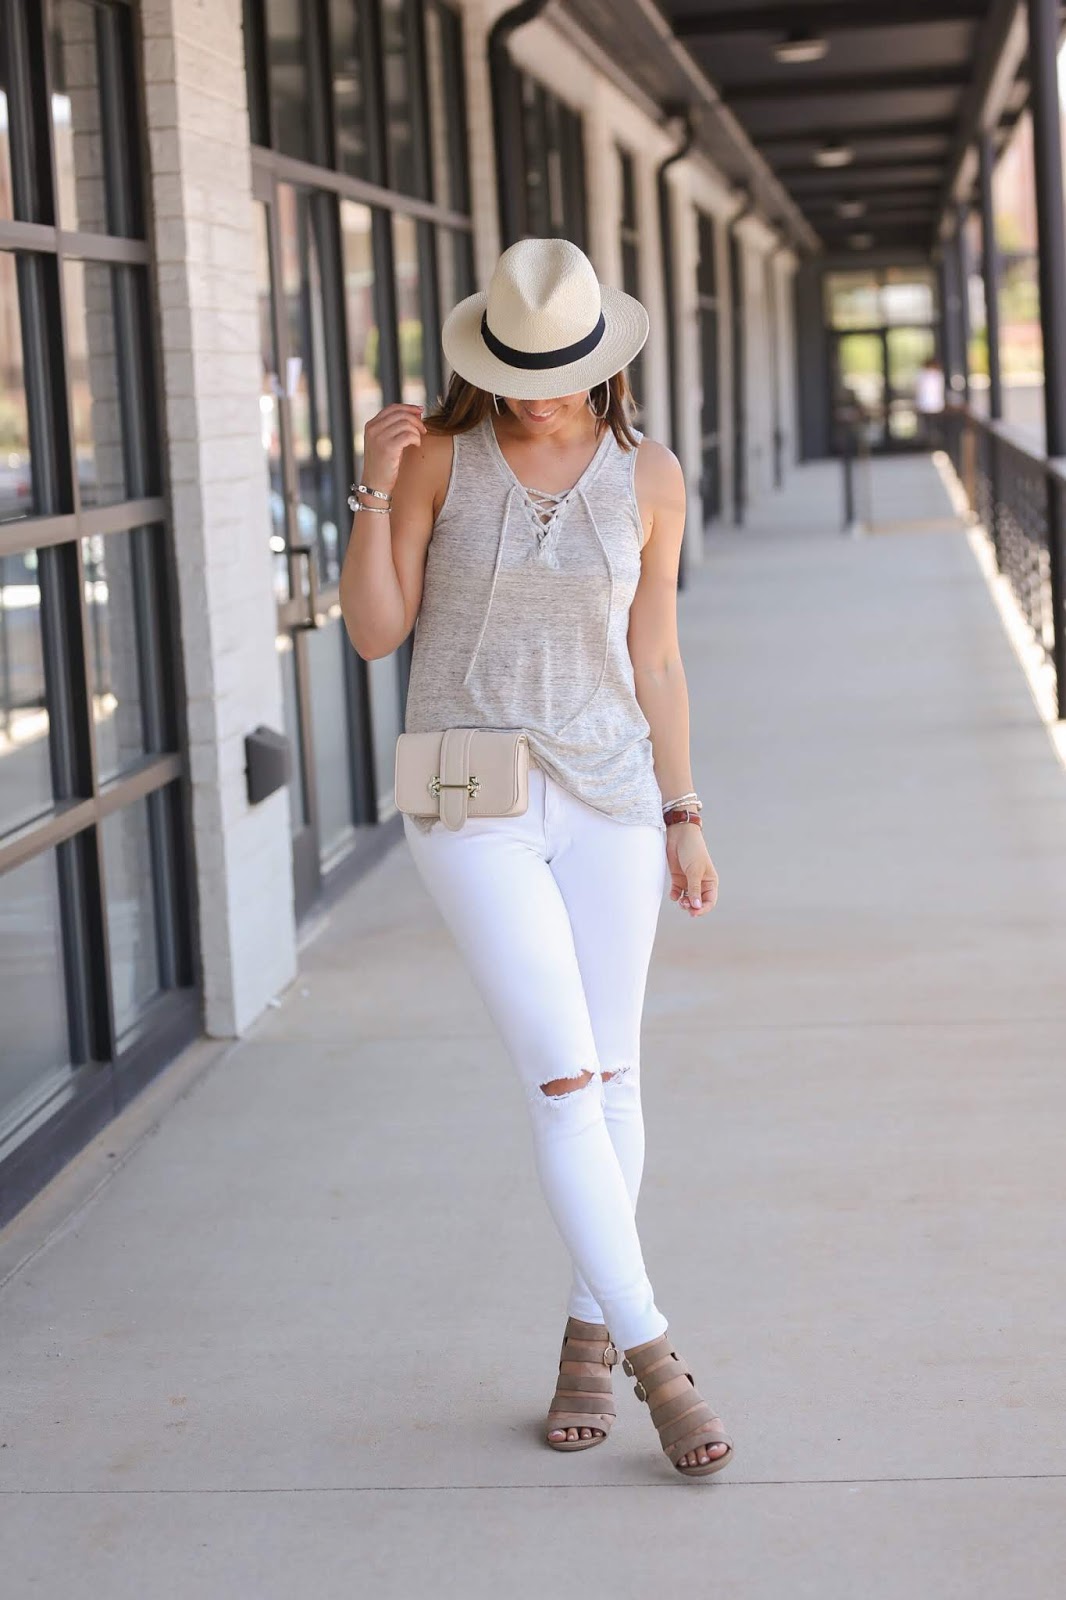 Can You Wear White After Labor Day? - All Of The F-Words